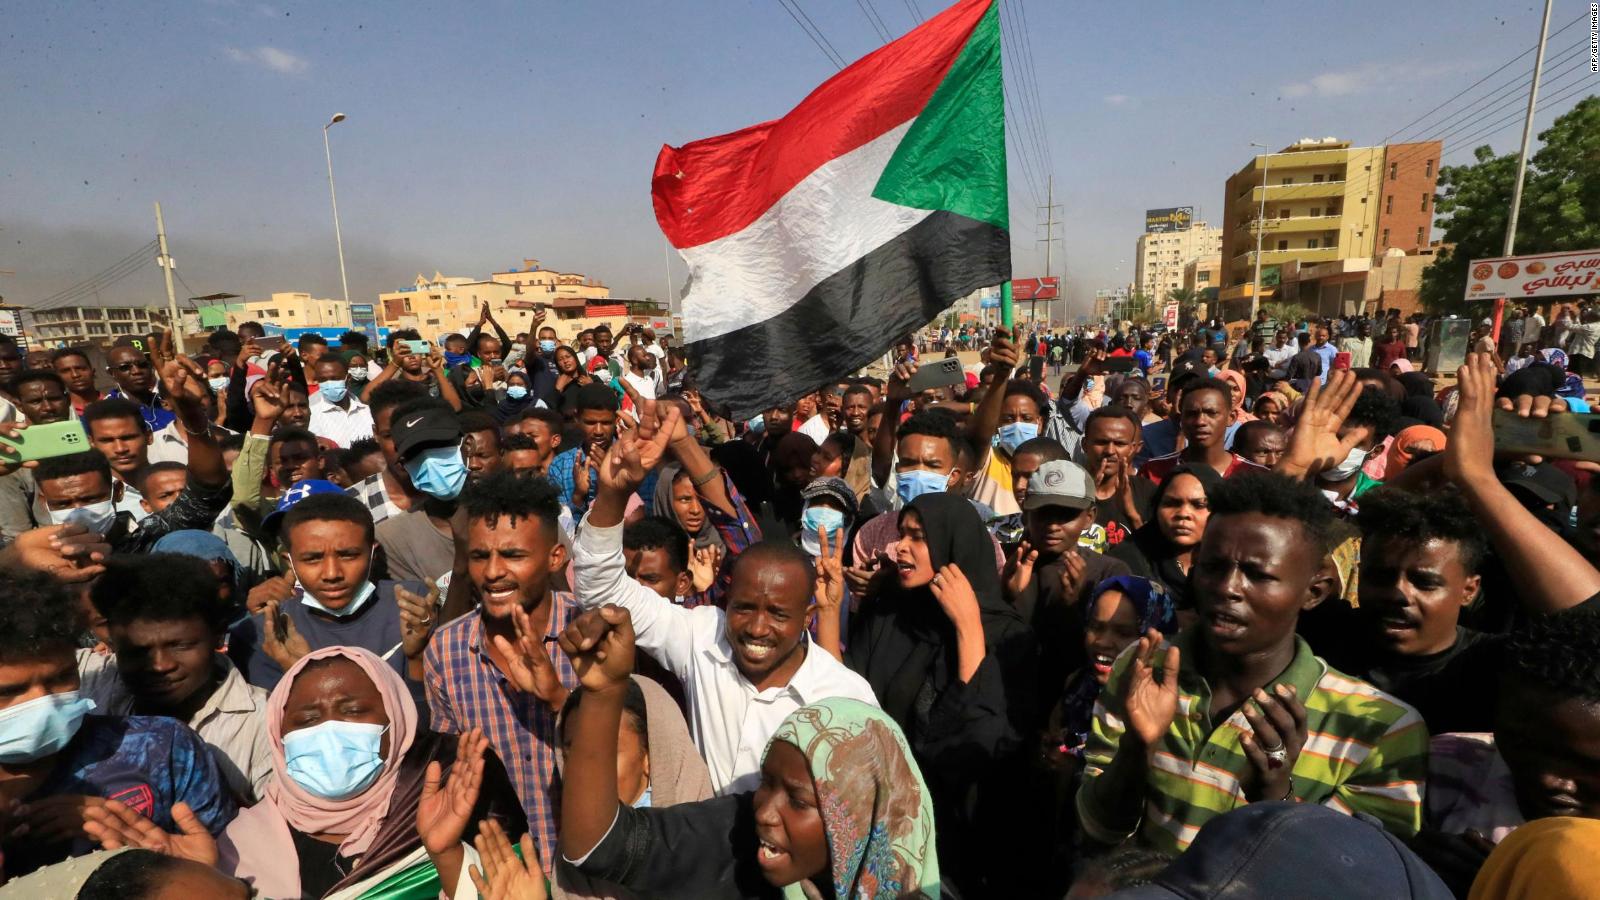 Sudan coup explained The military has taken over in Sudan. Here's what